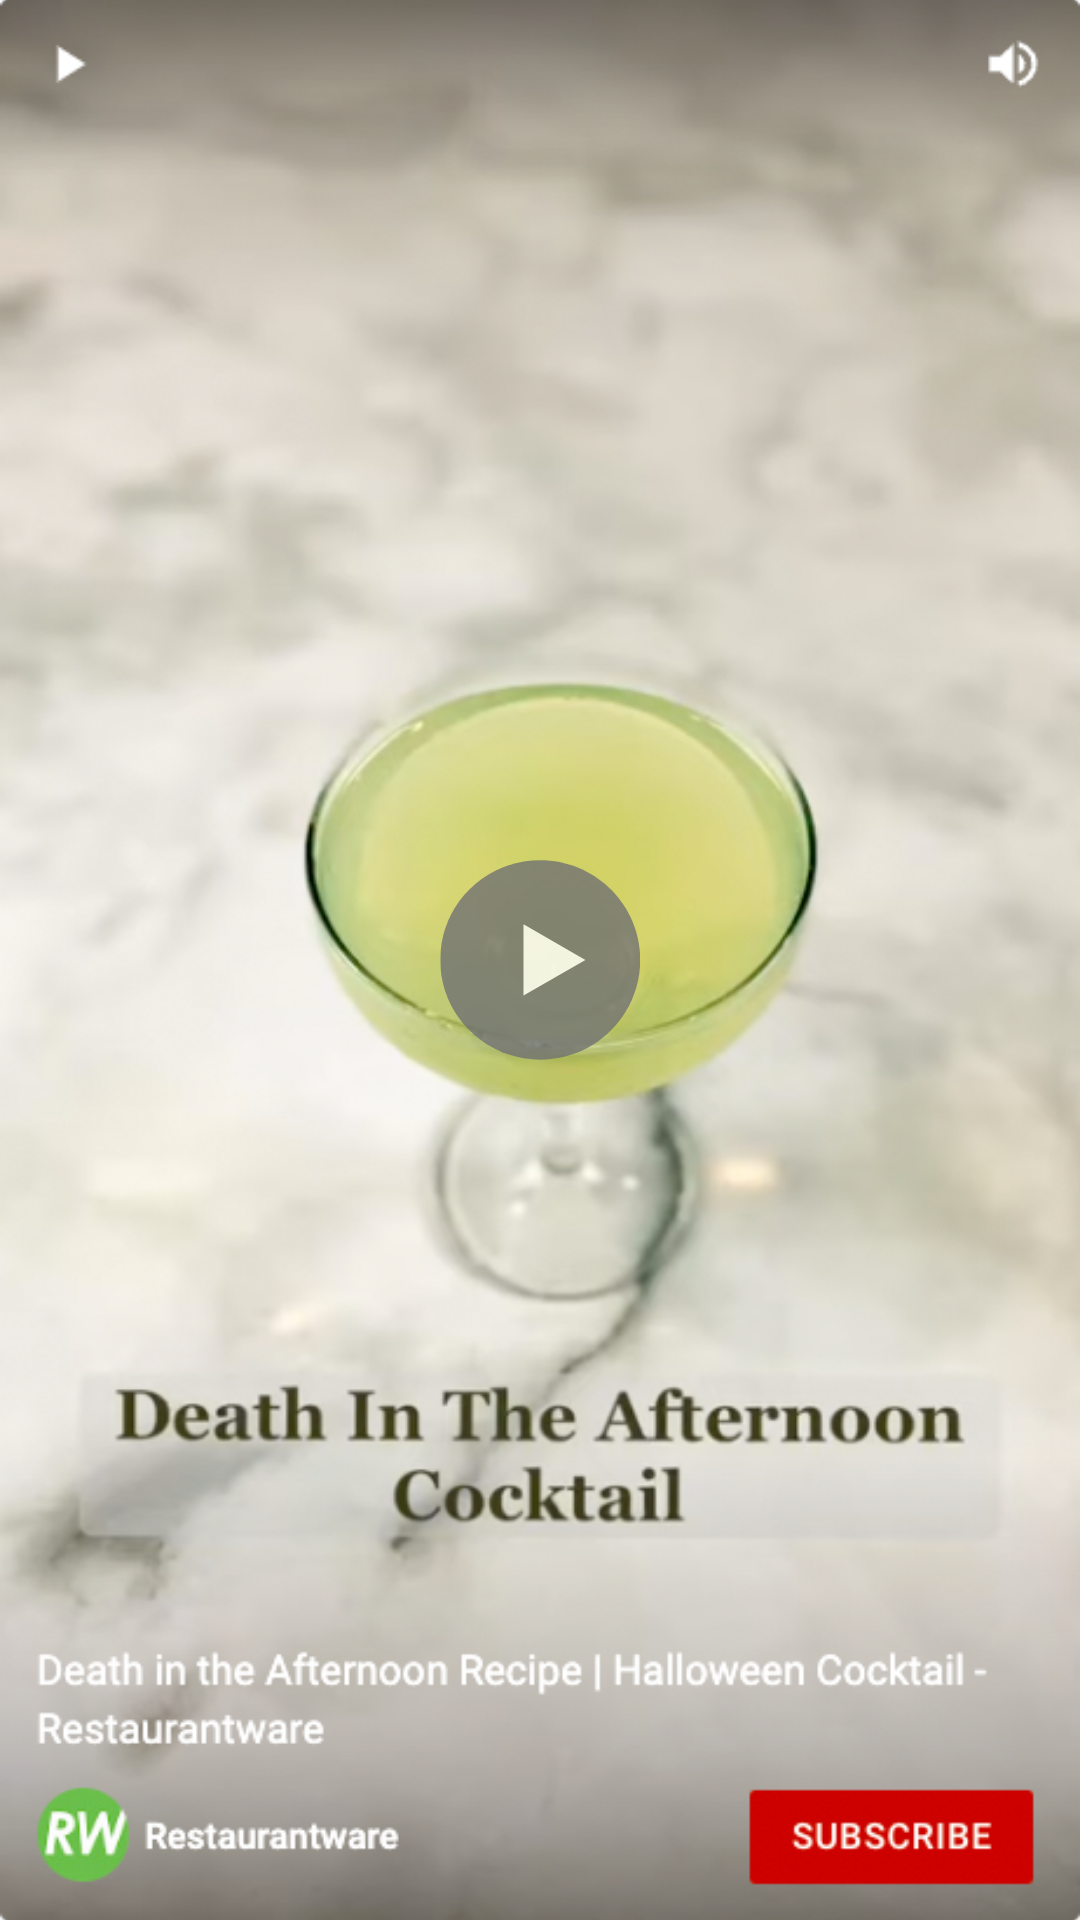 Cocktail recipe image to video